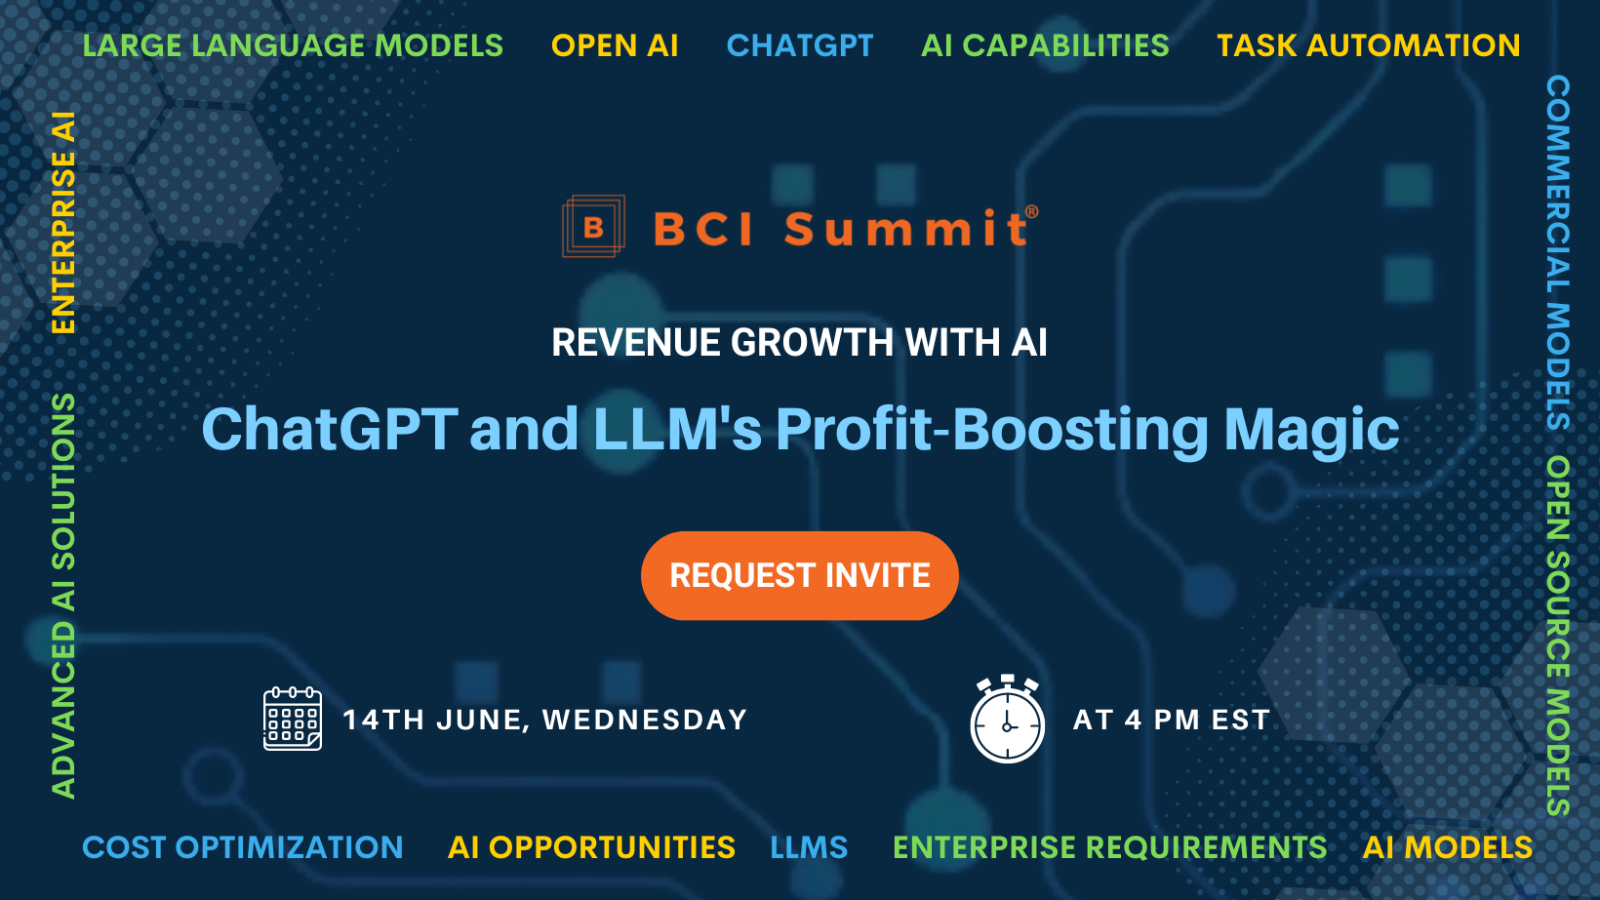 BCI Summit - Revenue Growth with AI, Online Event